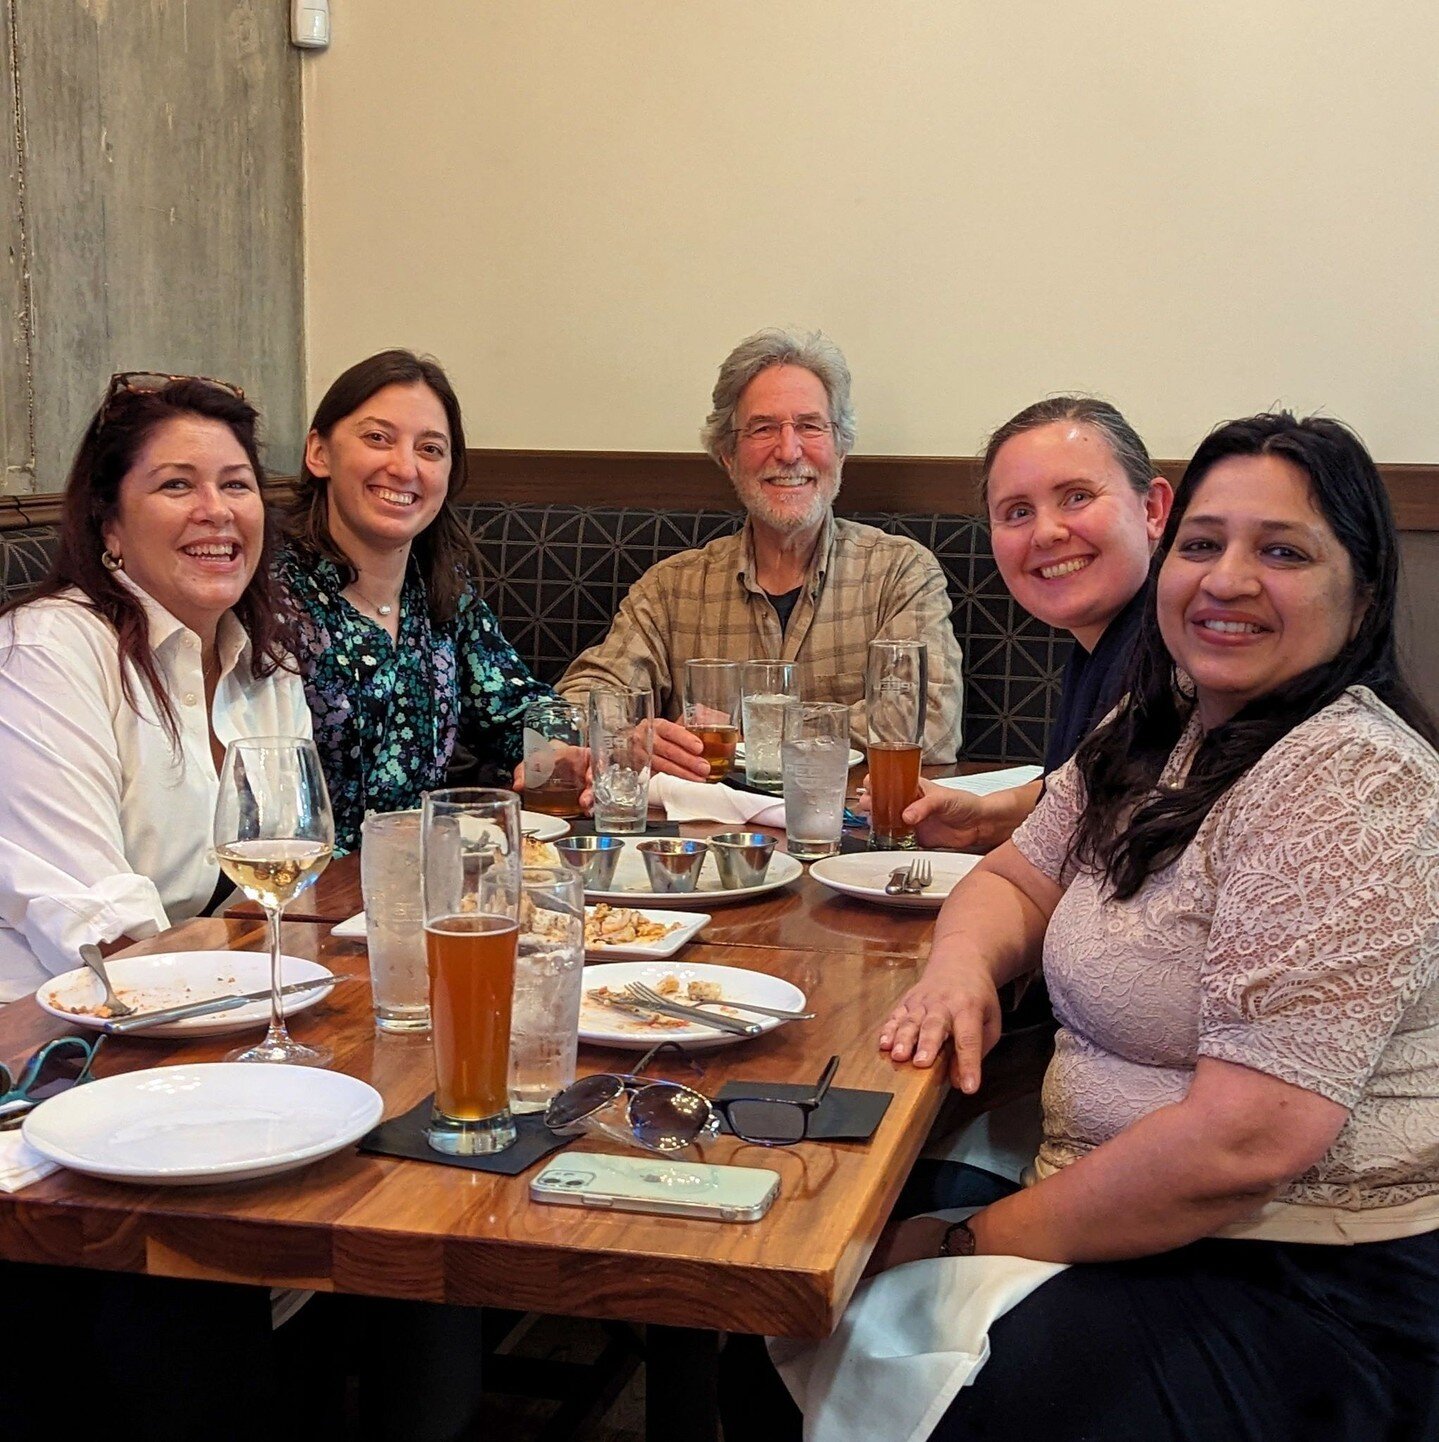 We had a blast celebrating the fifth anniversary of ThriveCo with a member happy hour at @peelwoodfiredpizza last month! Our ThriveCommunity enjoyed refreshing drinks, yummy bites, and lively conversation. We feel lucky to be part of this community f